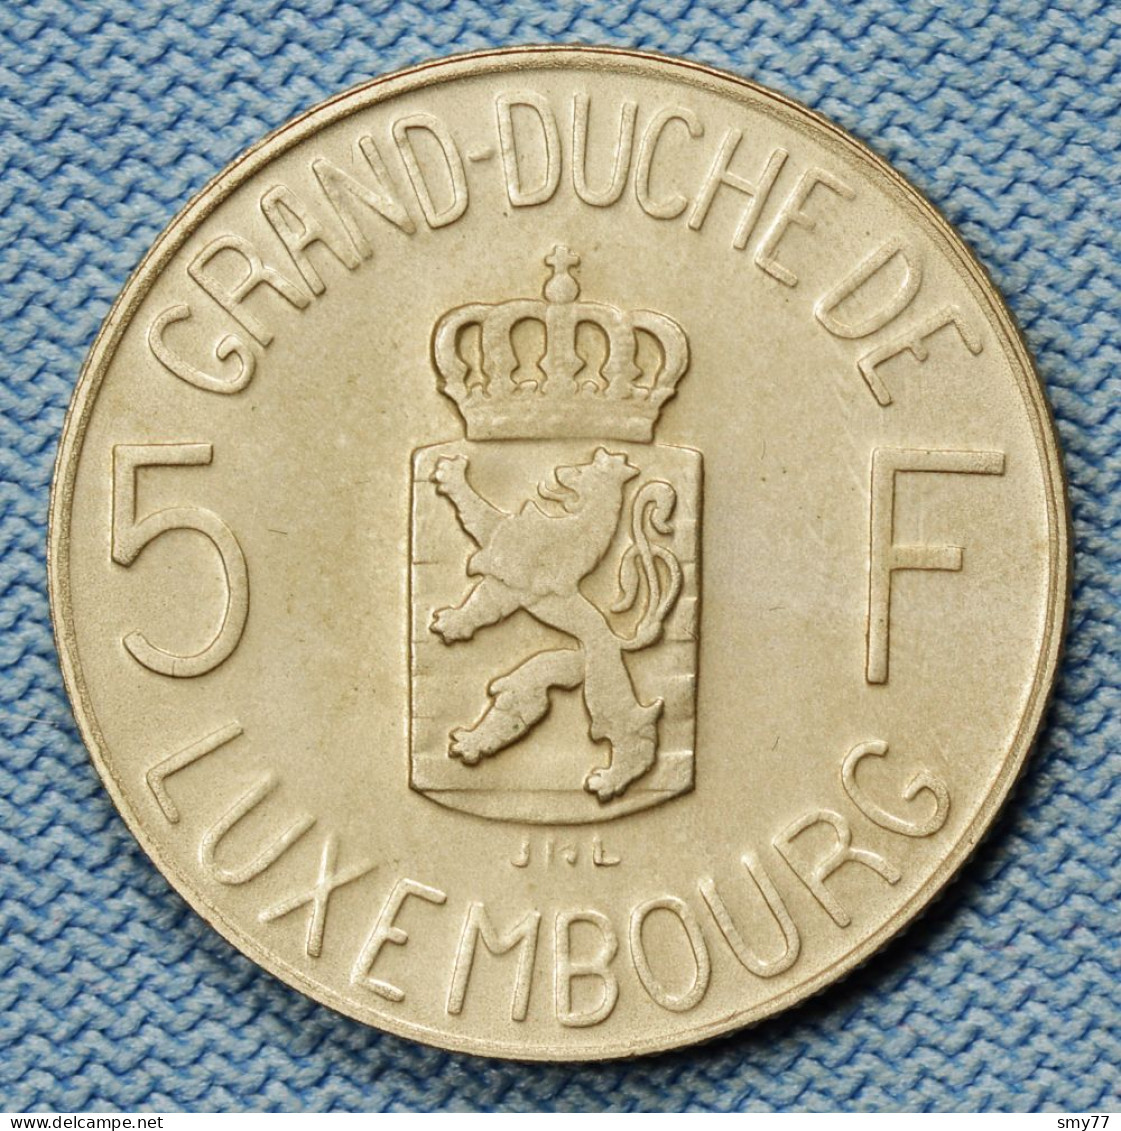 Luxembourg • 5 Francs 1980  Argent / Silver 925‰ (Charlotte) •  QP / Flan Poli  •  3'000 Ex.  • Rare •  [24-462] - Luxembourg